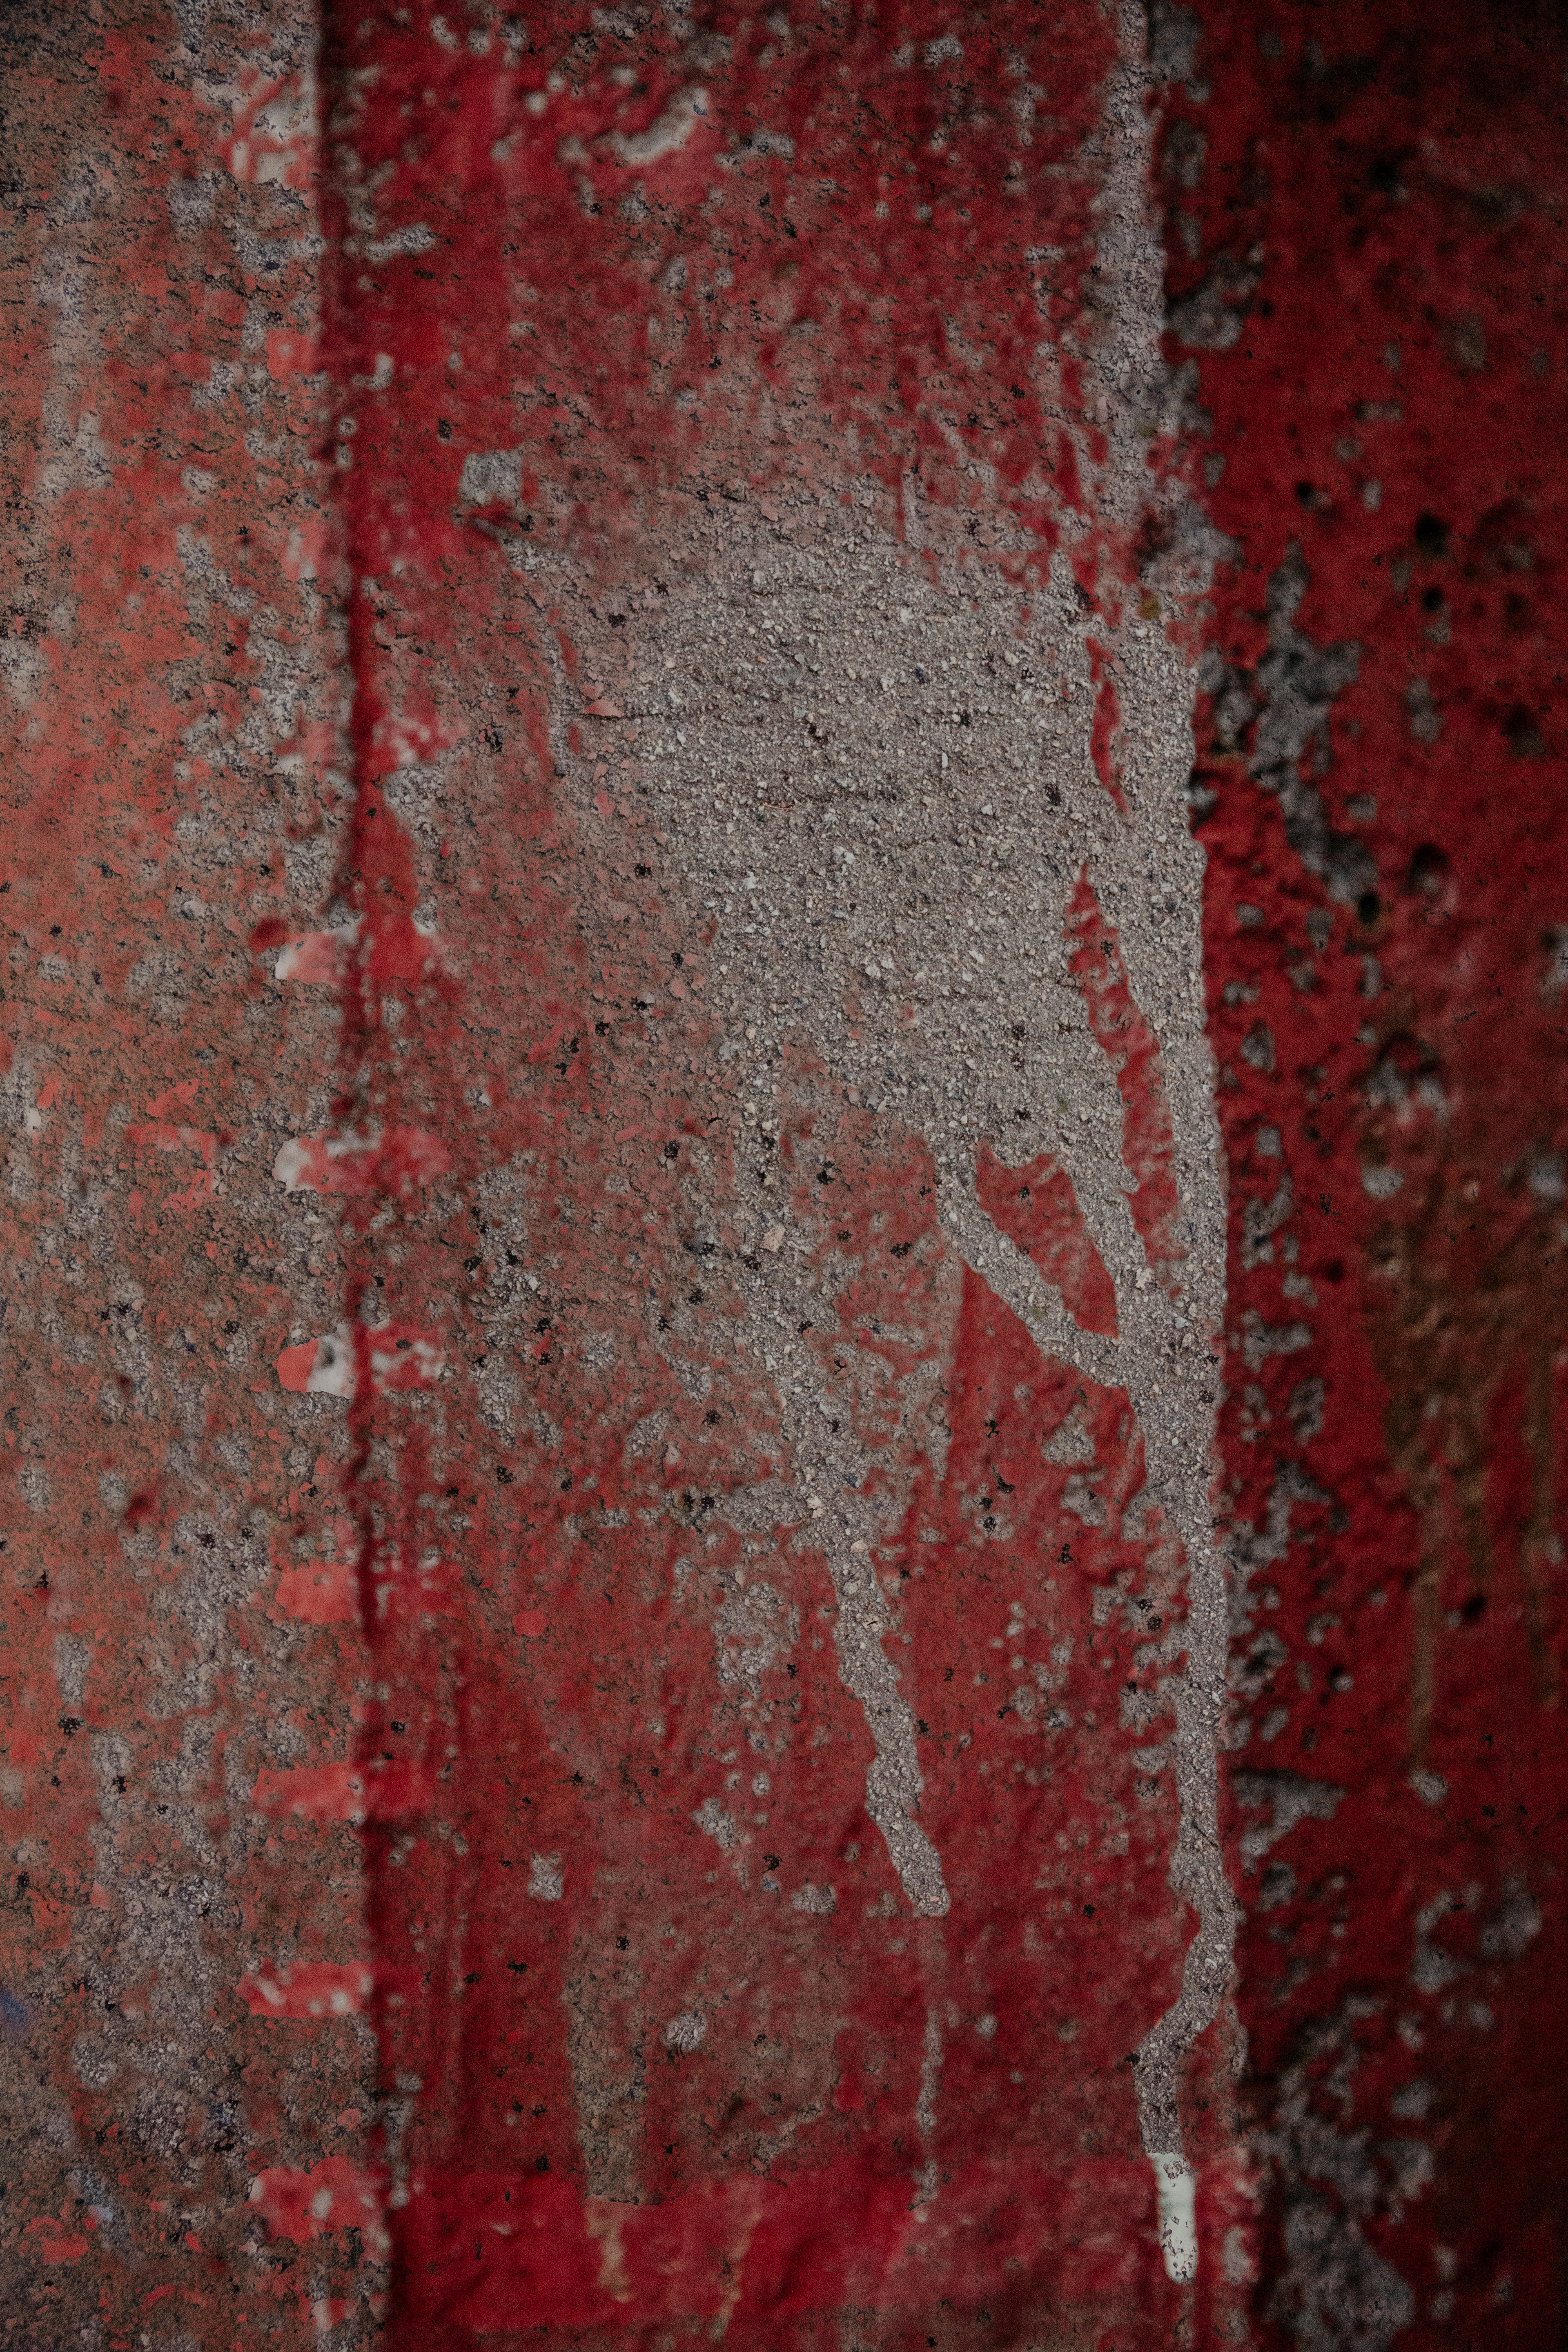 texture, textures, red, stains, spots, stone, scuffs, scuff